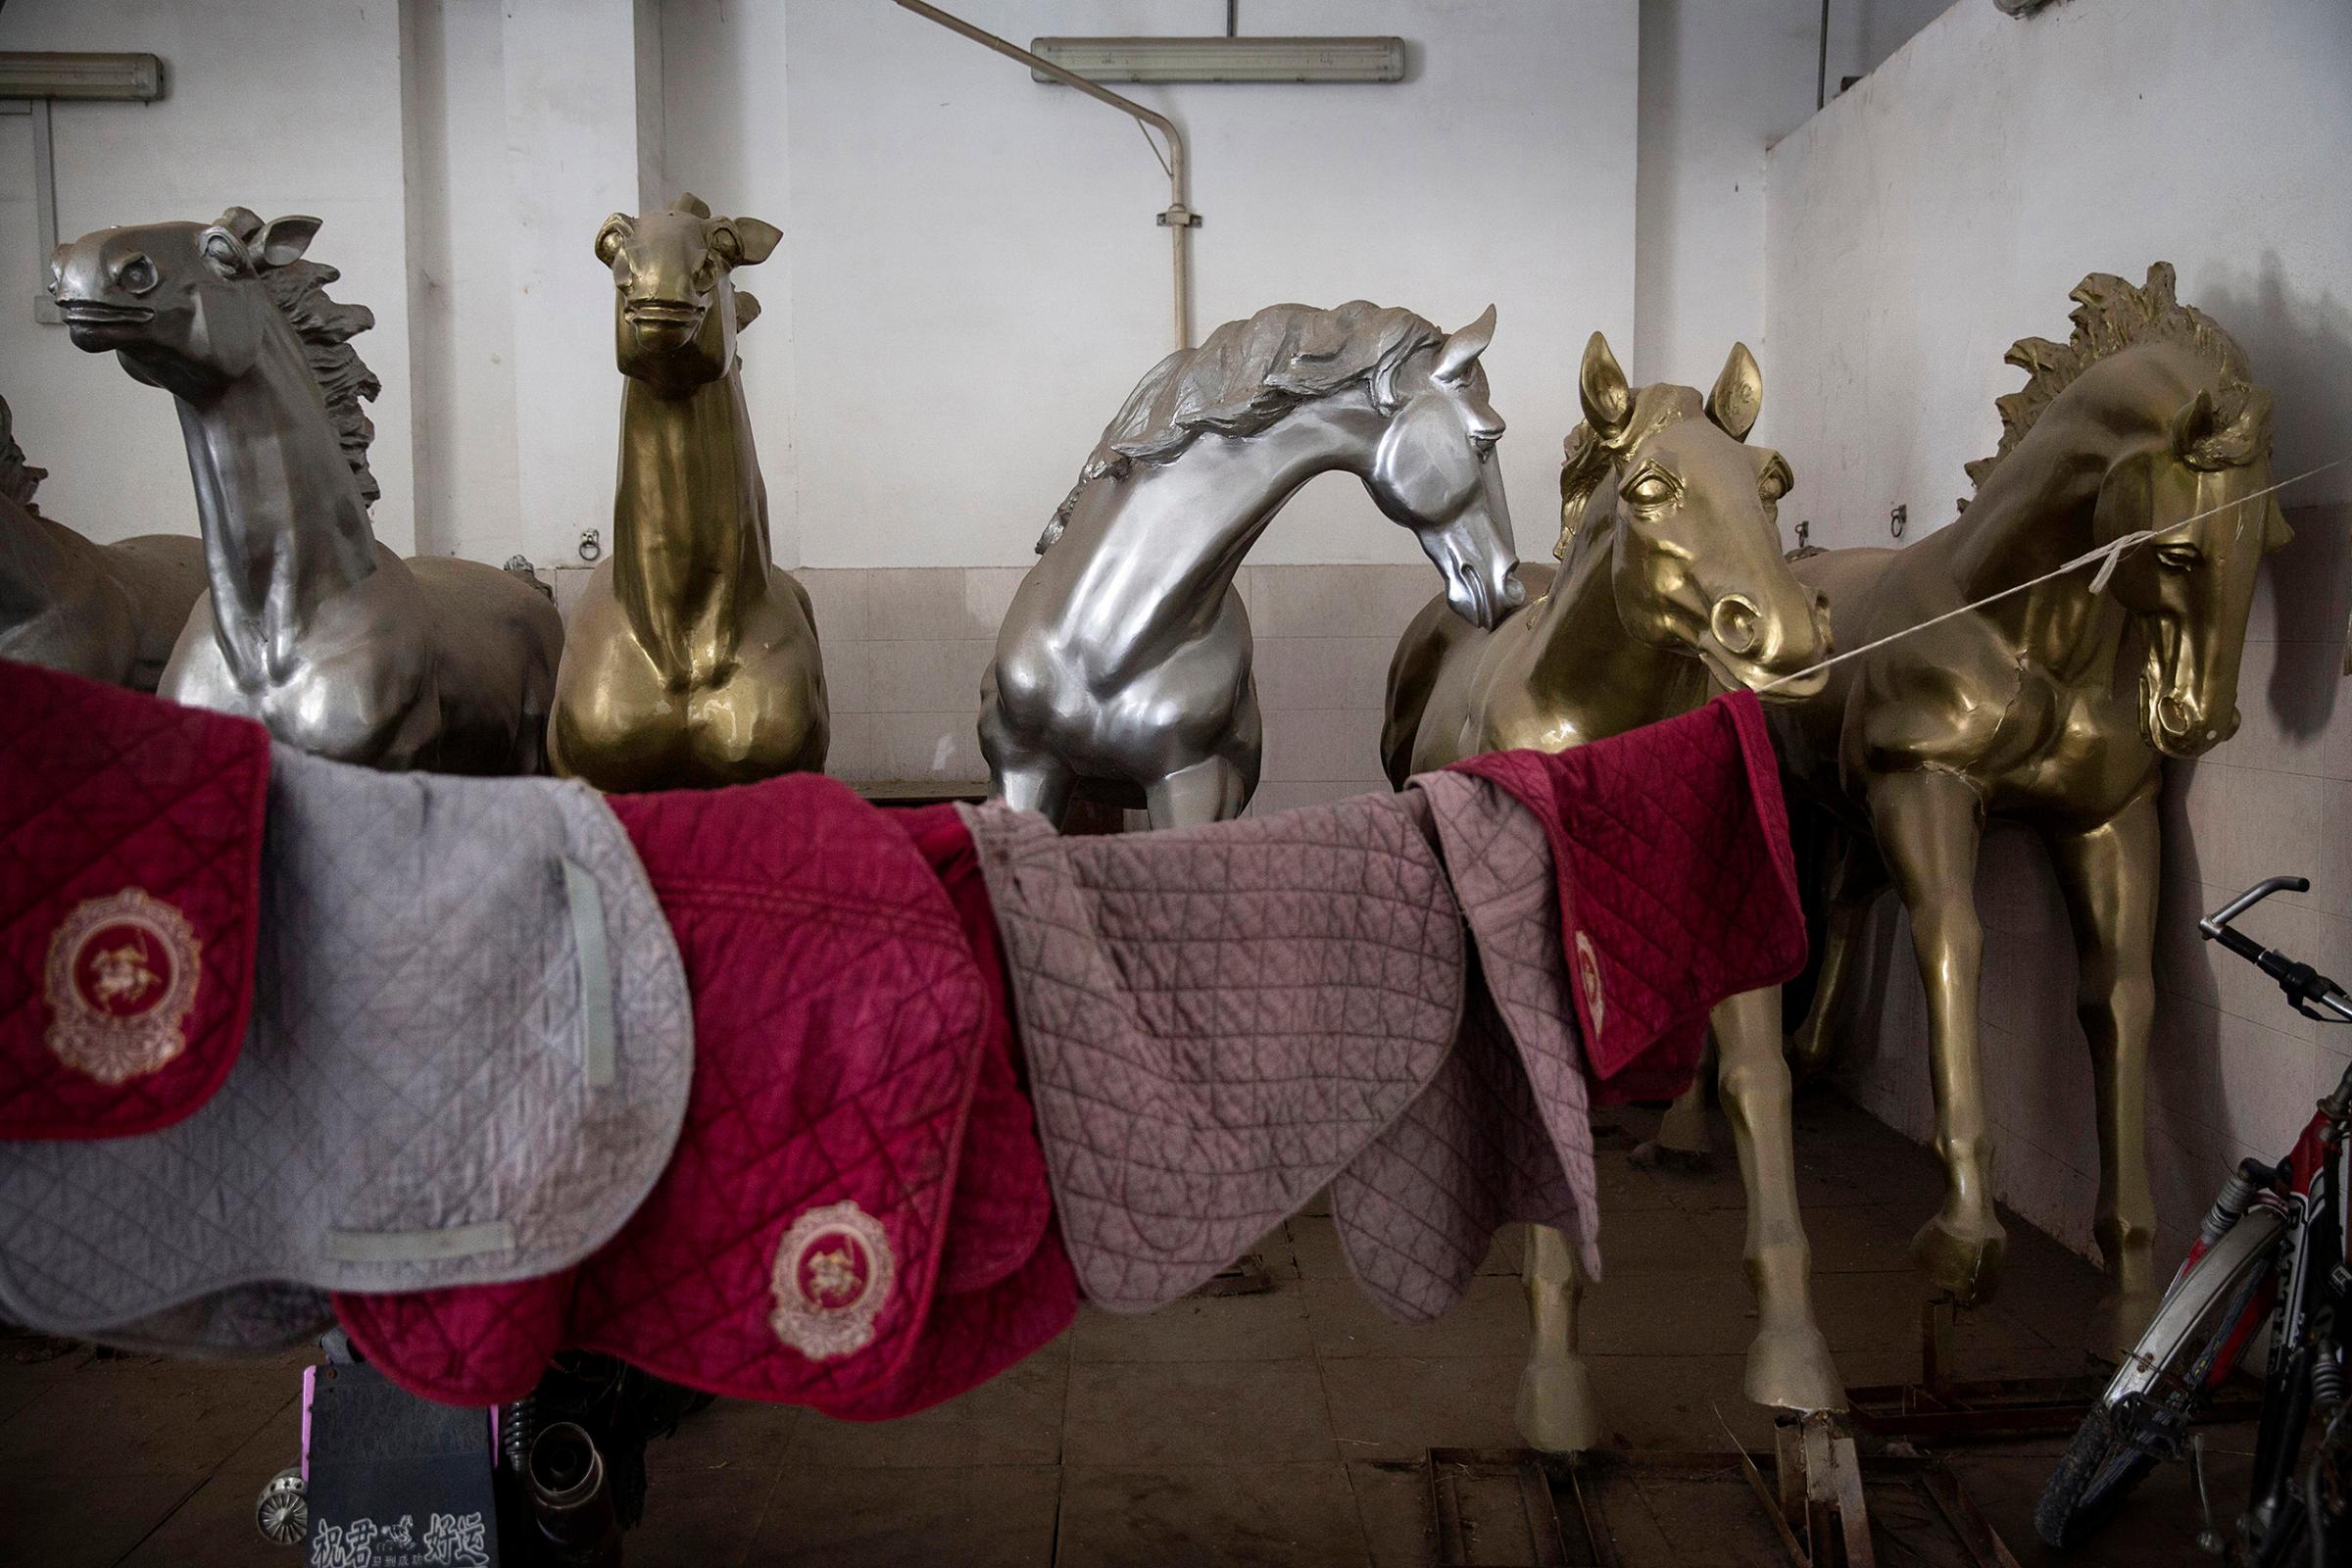 Painted horse sculptures are seen in the stables at the Tianjin Goldin Metropolitan Polo Club in Tianjin, China, on July 16, 2016.